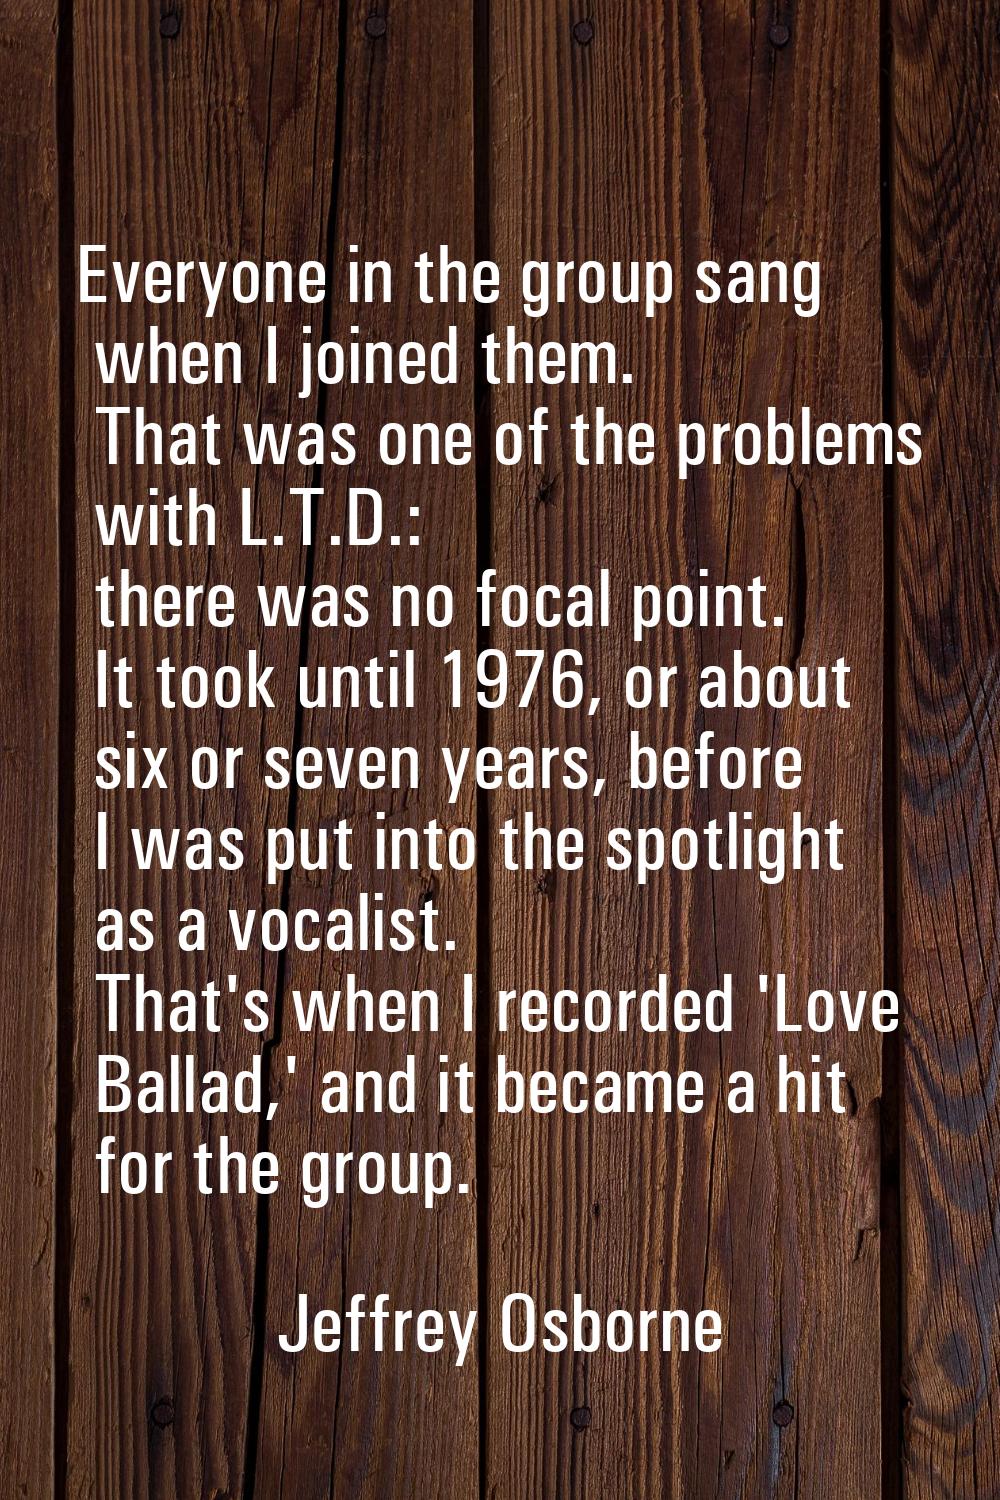 Everyone in the group sang when I joined them. That was one of the problems with L.T.D.: there was 